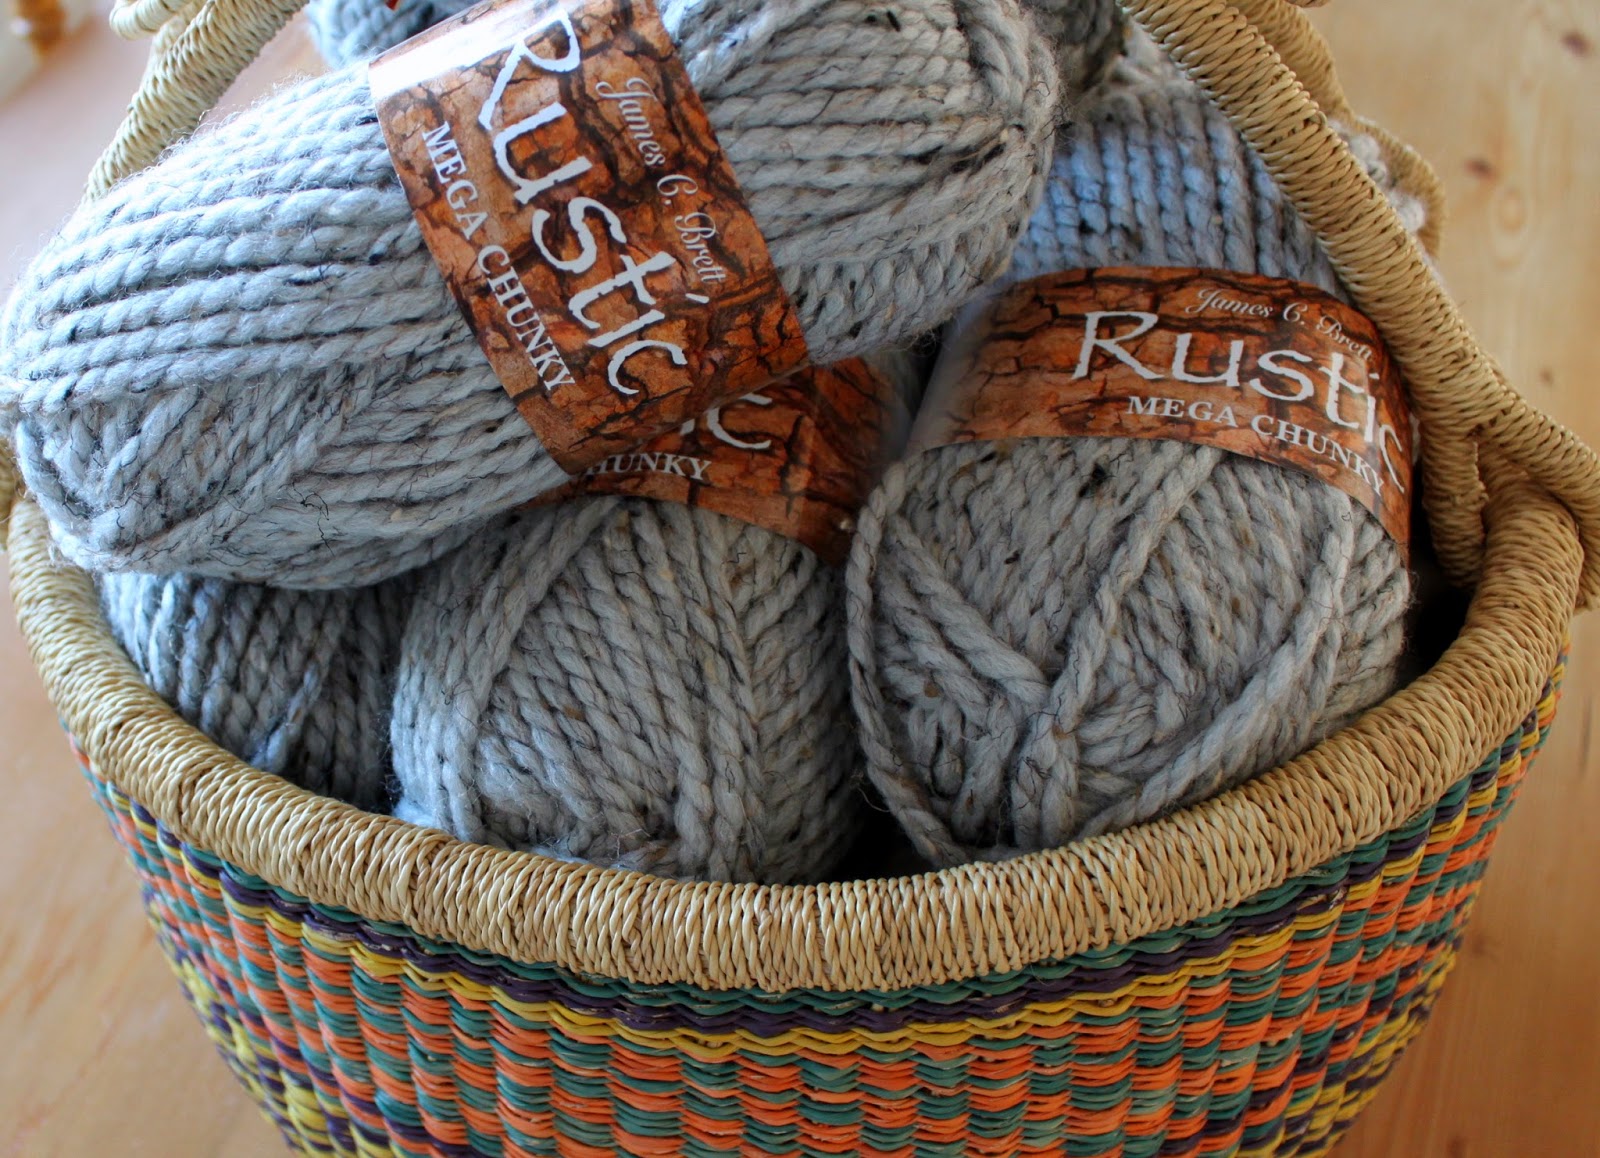 Hand Knitted Things Rustic Mega Chunky Yarn Review